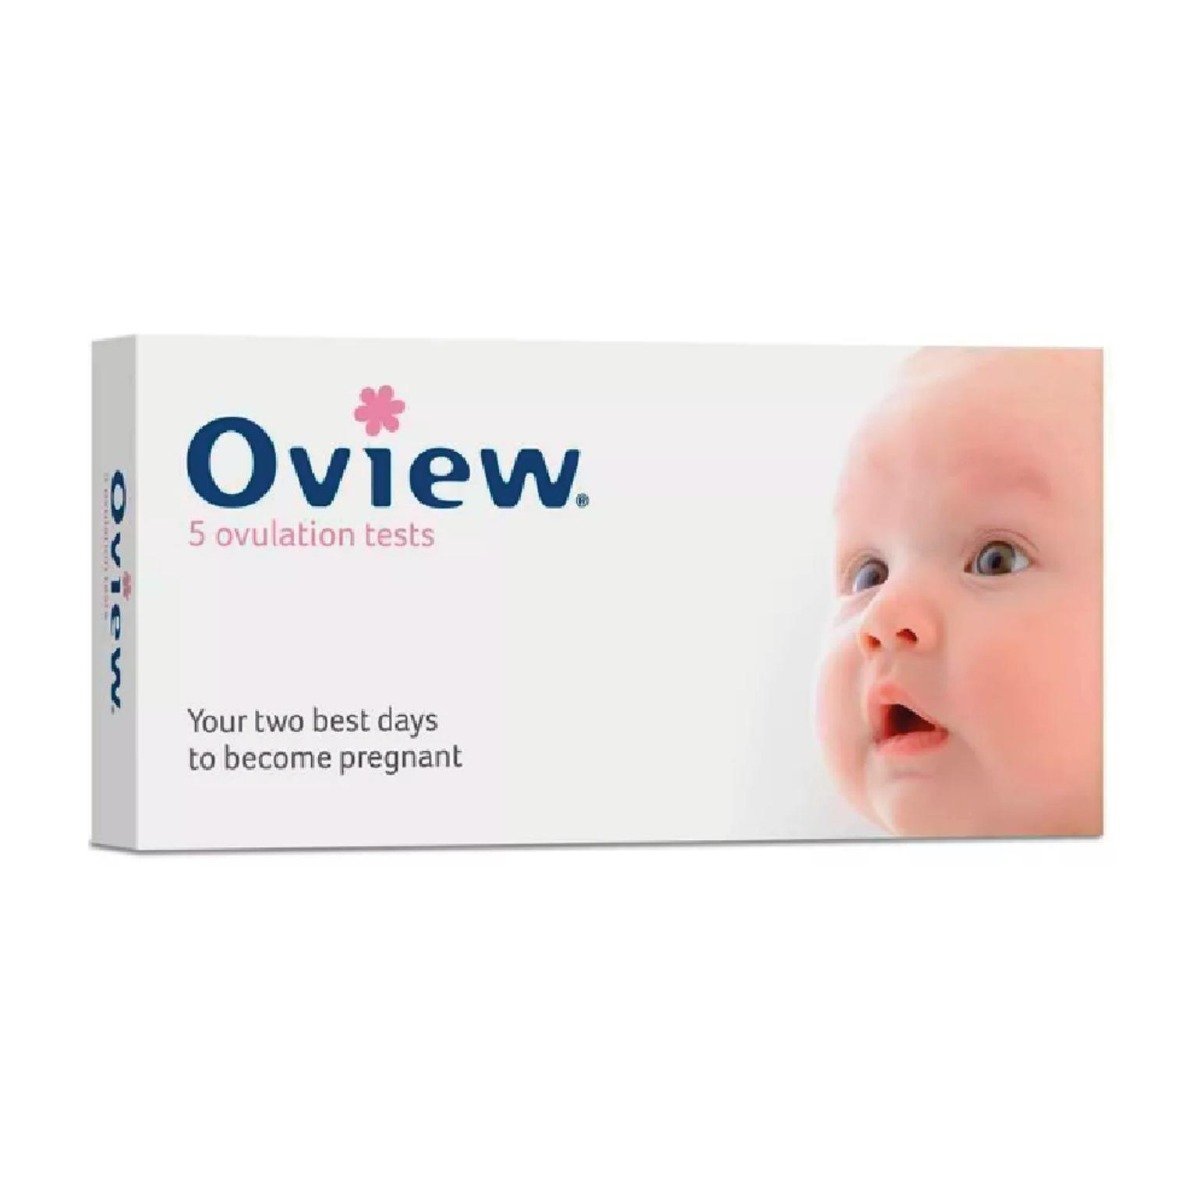 Oview Ovulation Test - 5 tests - Bloom Pharmacy